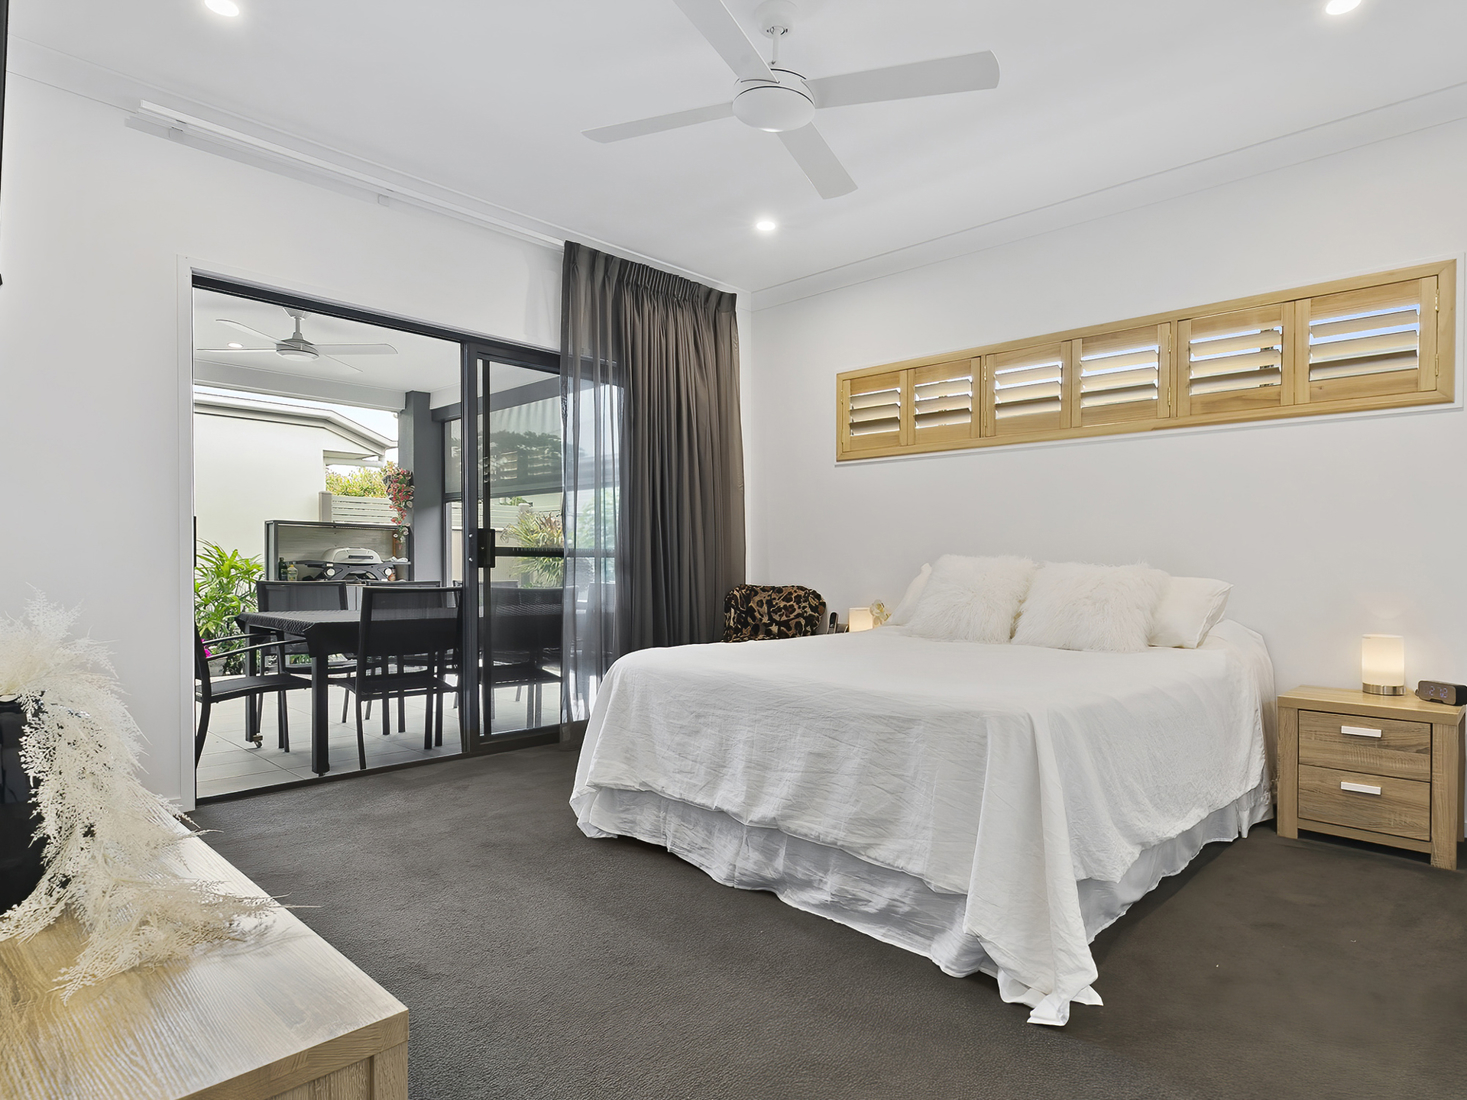 interior image of white bedroom with timber window accents and white bedspread opening up to an outdoor patio.